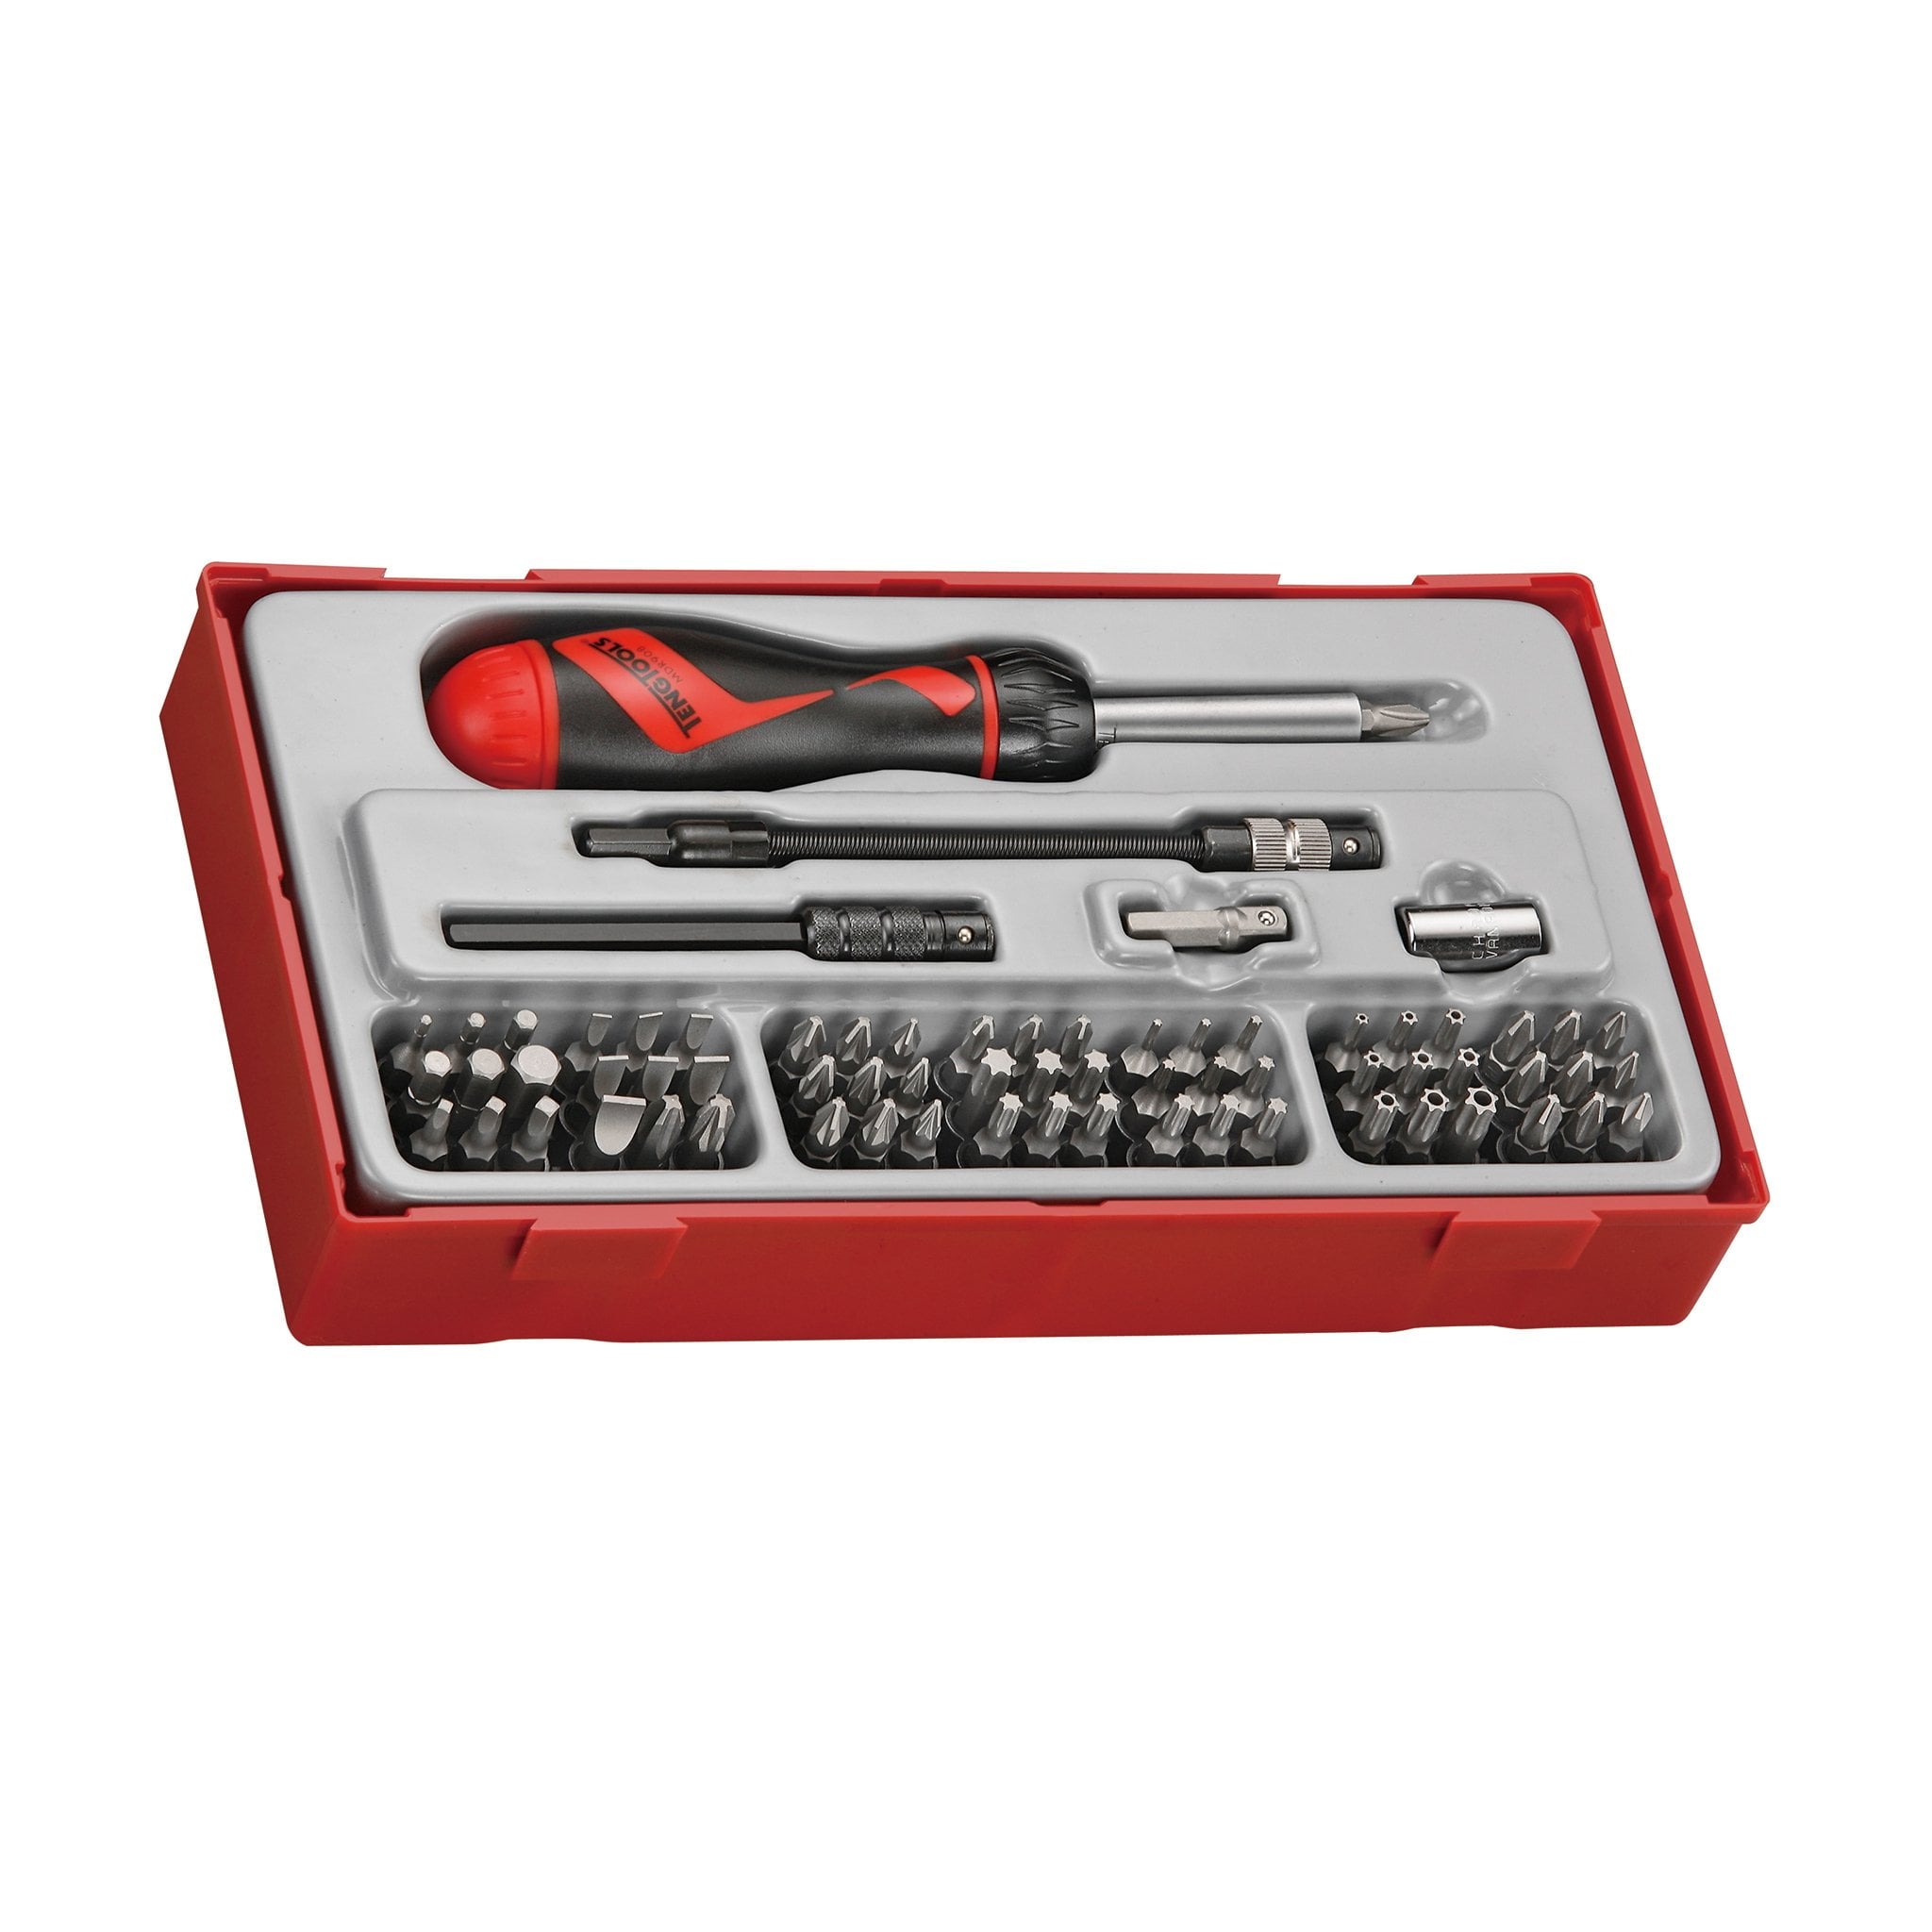 Teng Tools 74 Piece 1/4 Inch Drive Ratcheting Bits Driver, Extension & Adaptor Set - TTMD74